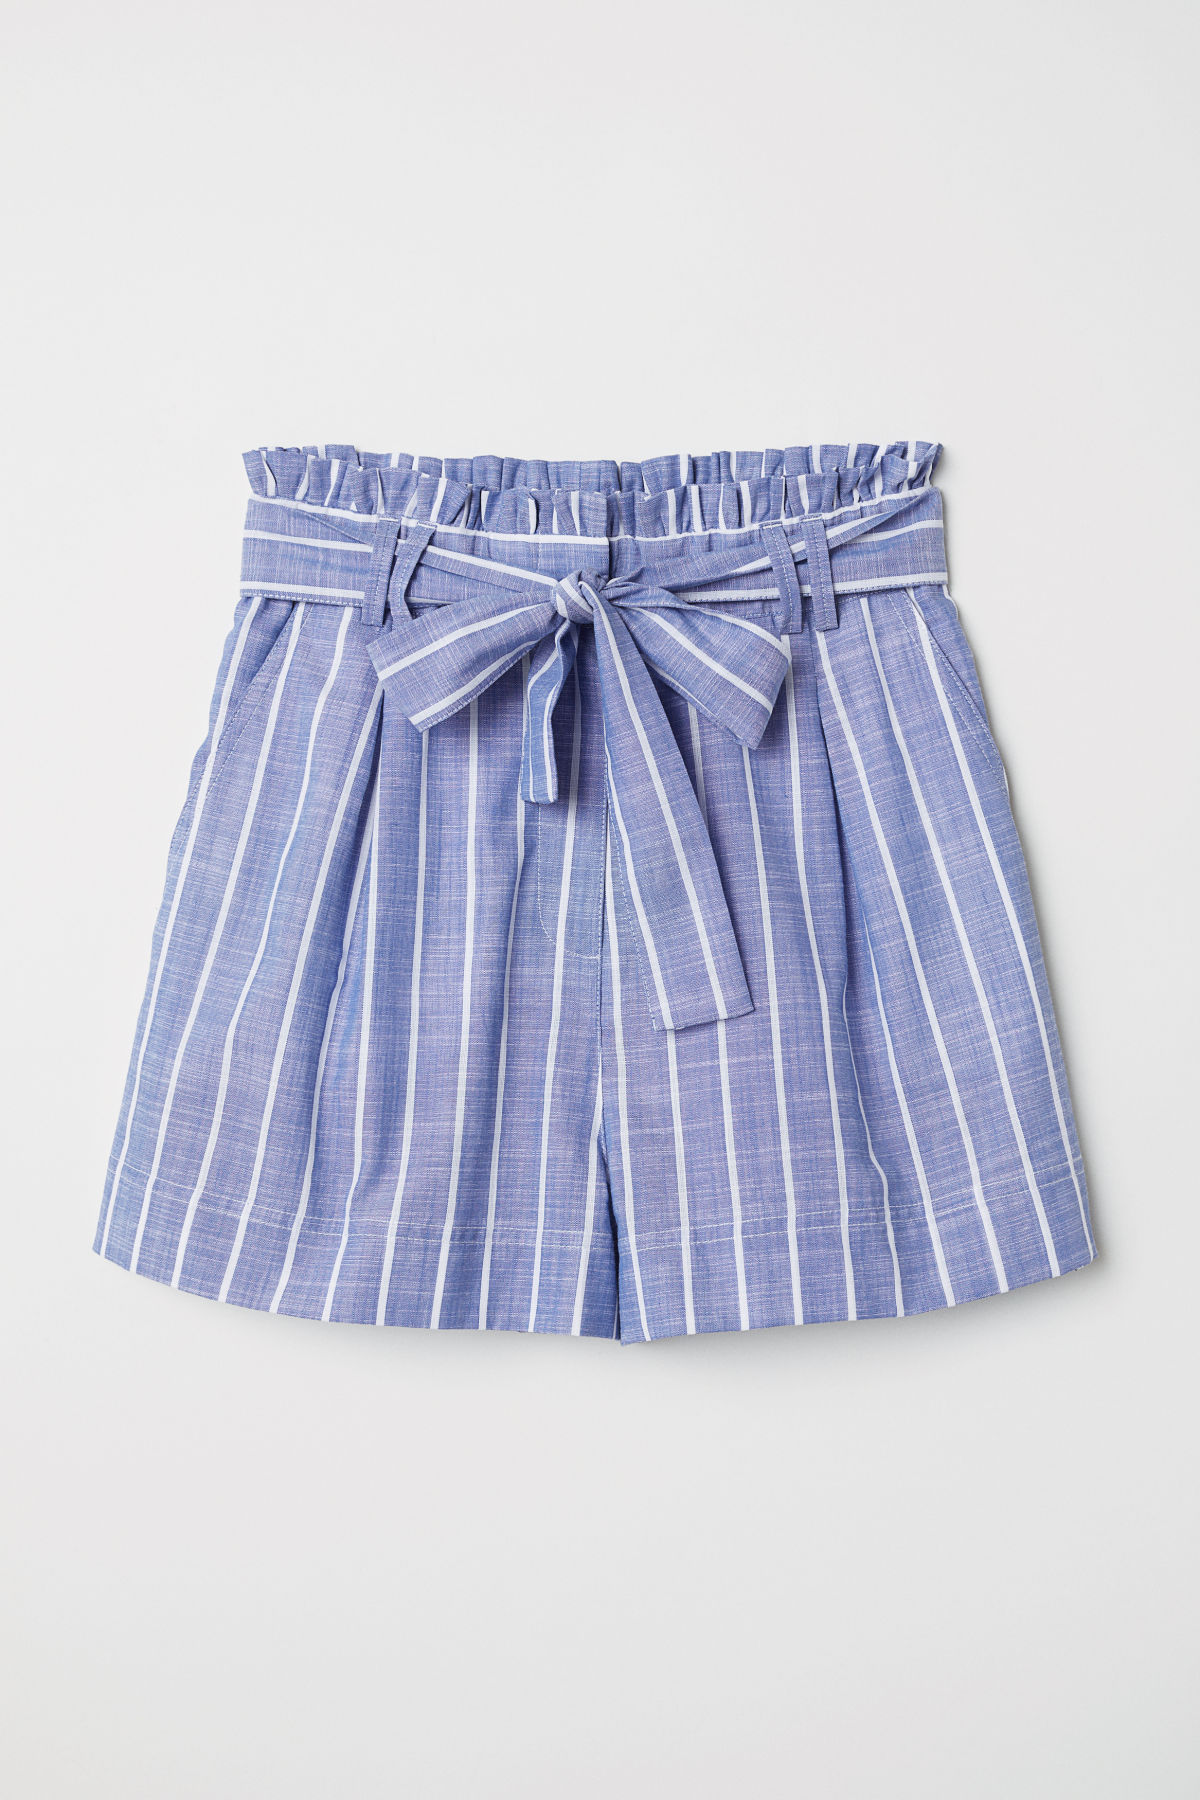 Blue Striped Shorts with Bow